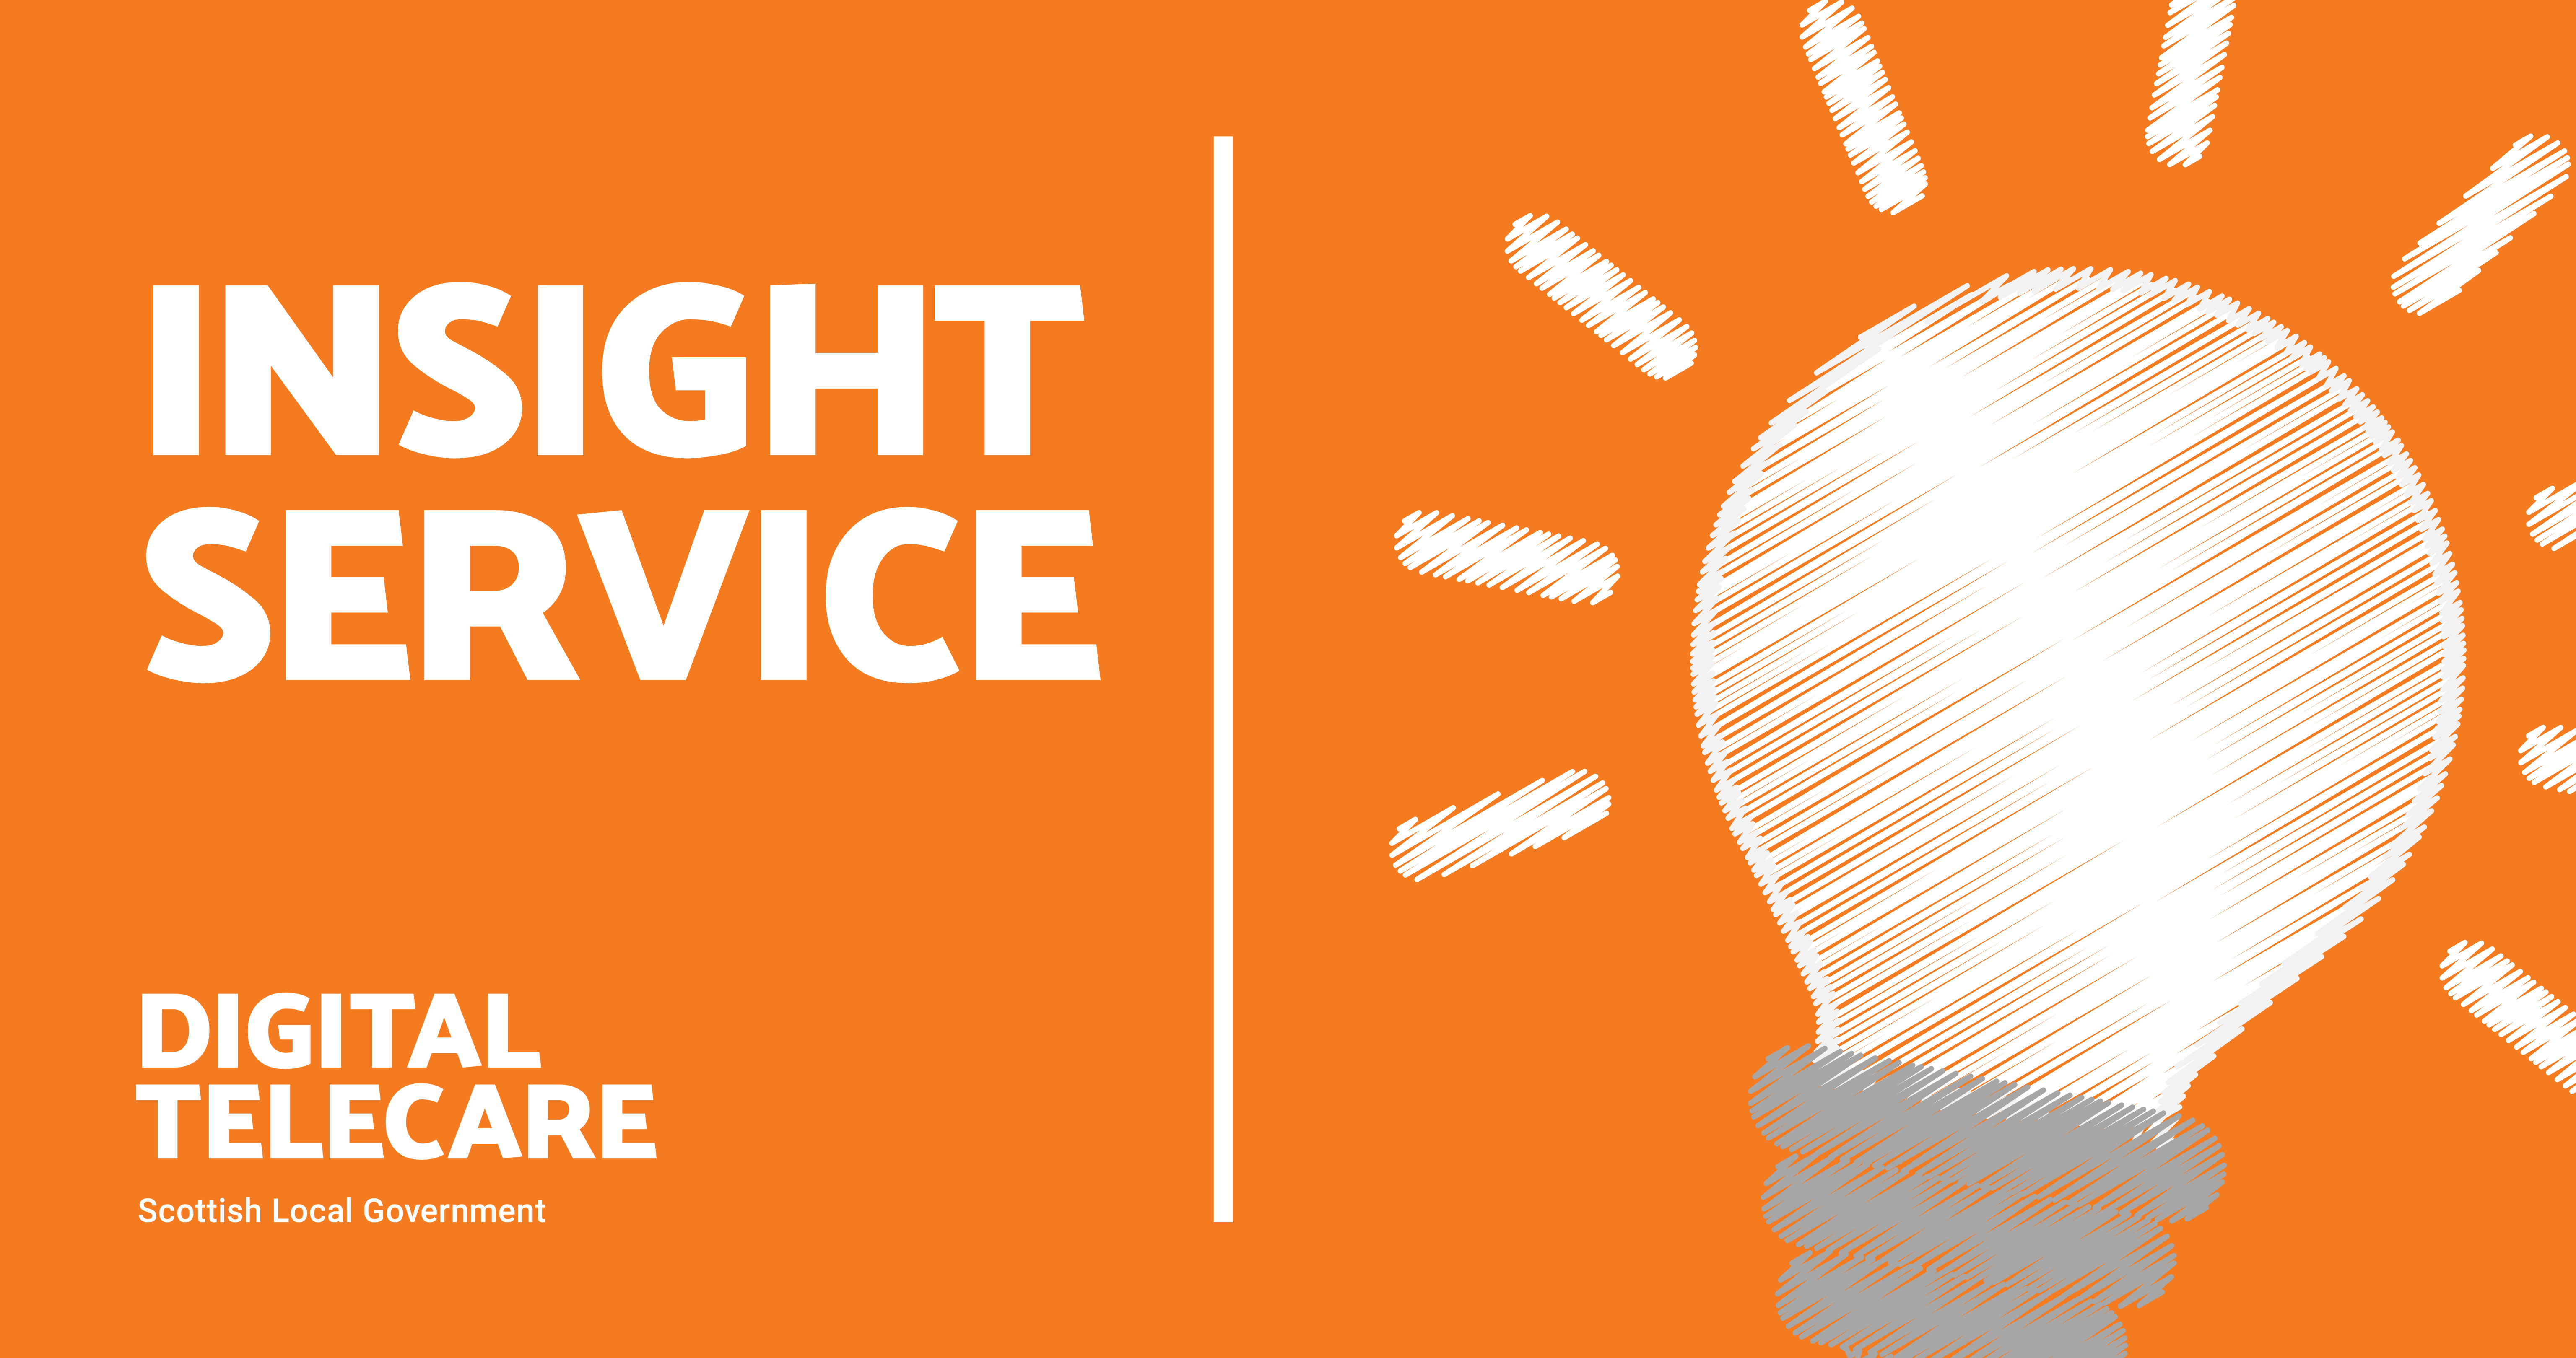 INSIGHT SERVICE MAY 2021: ANALOGUE TELEPHONY SWITCHOVER UPDATE